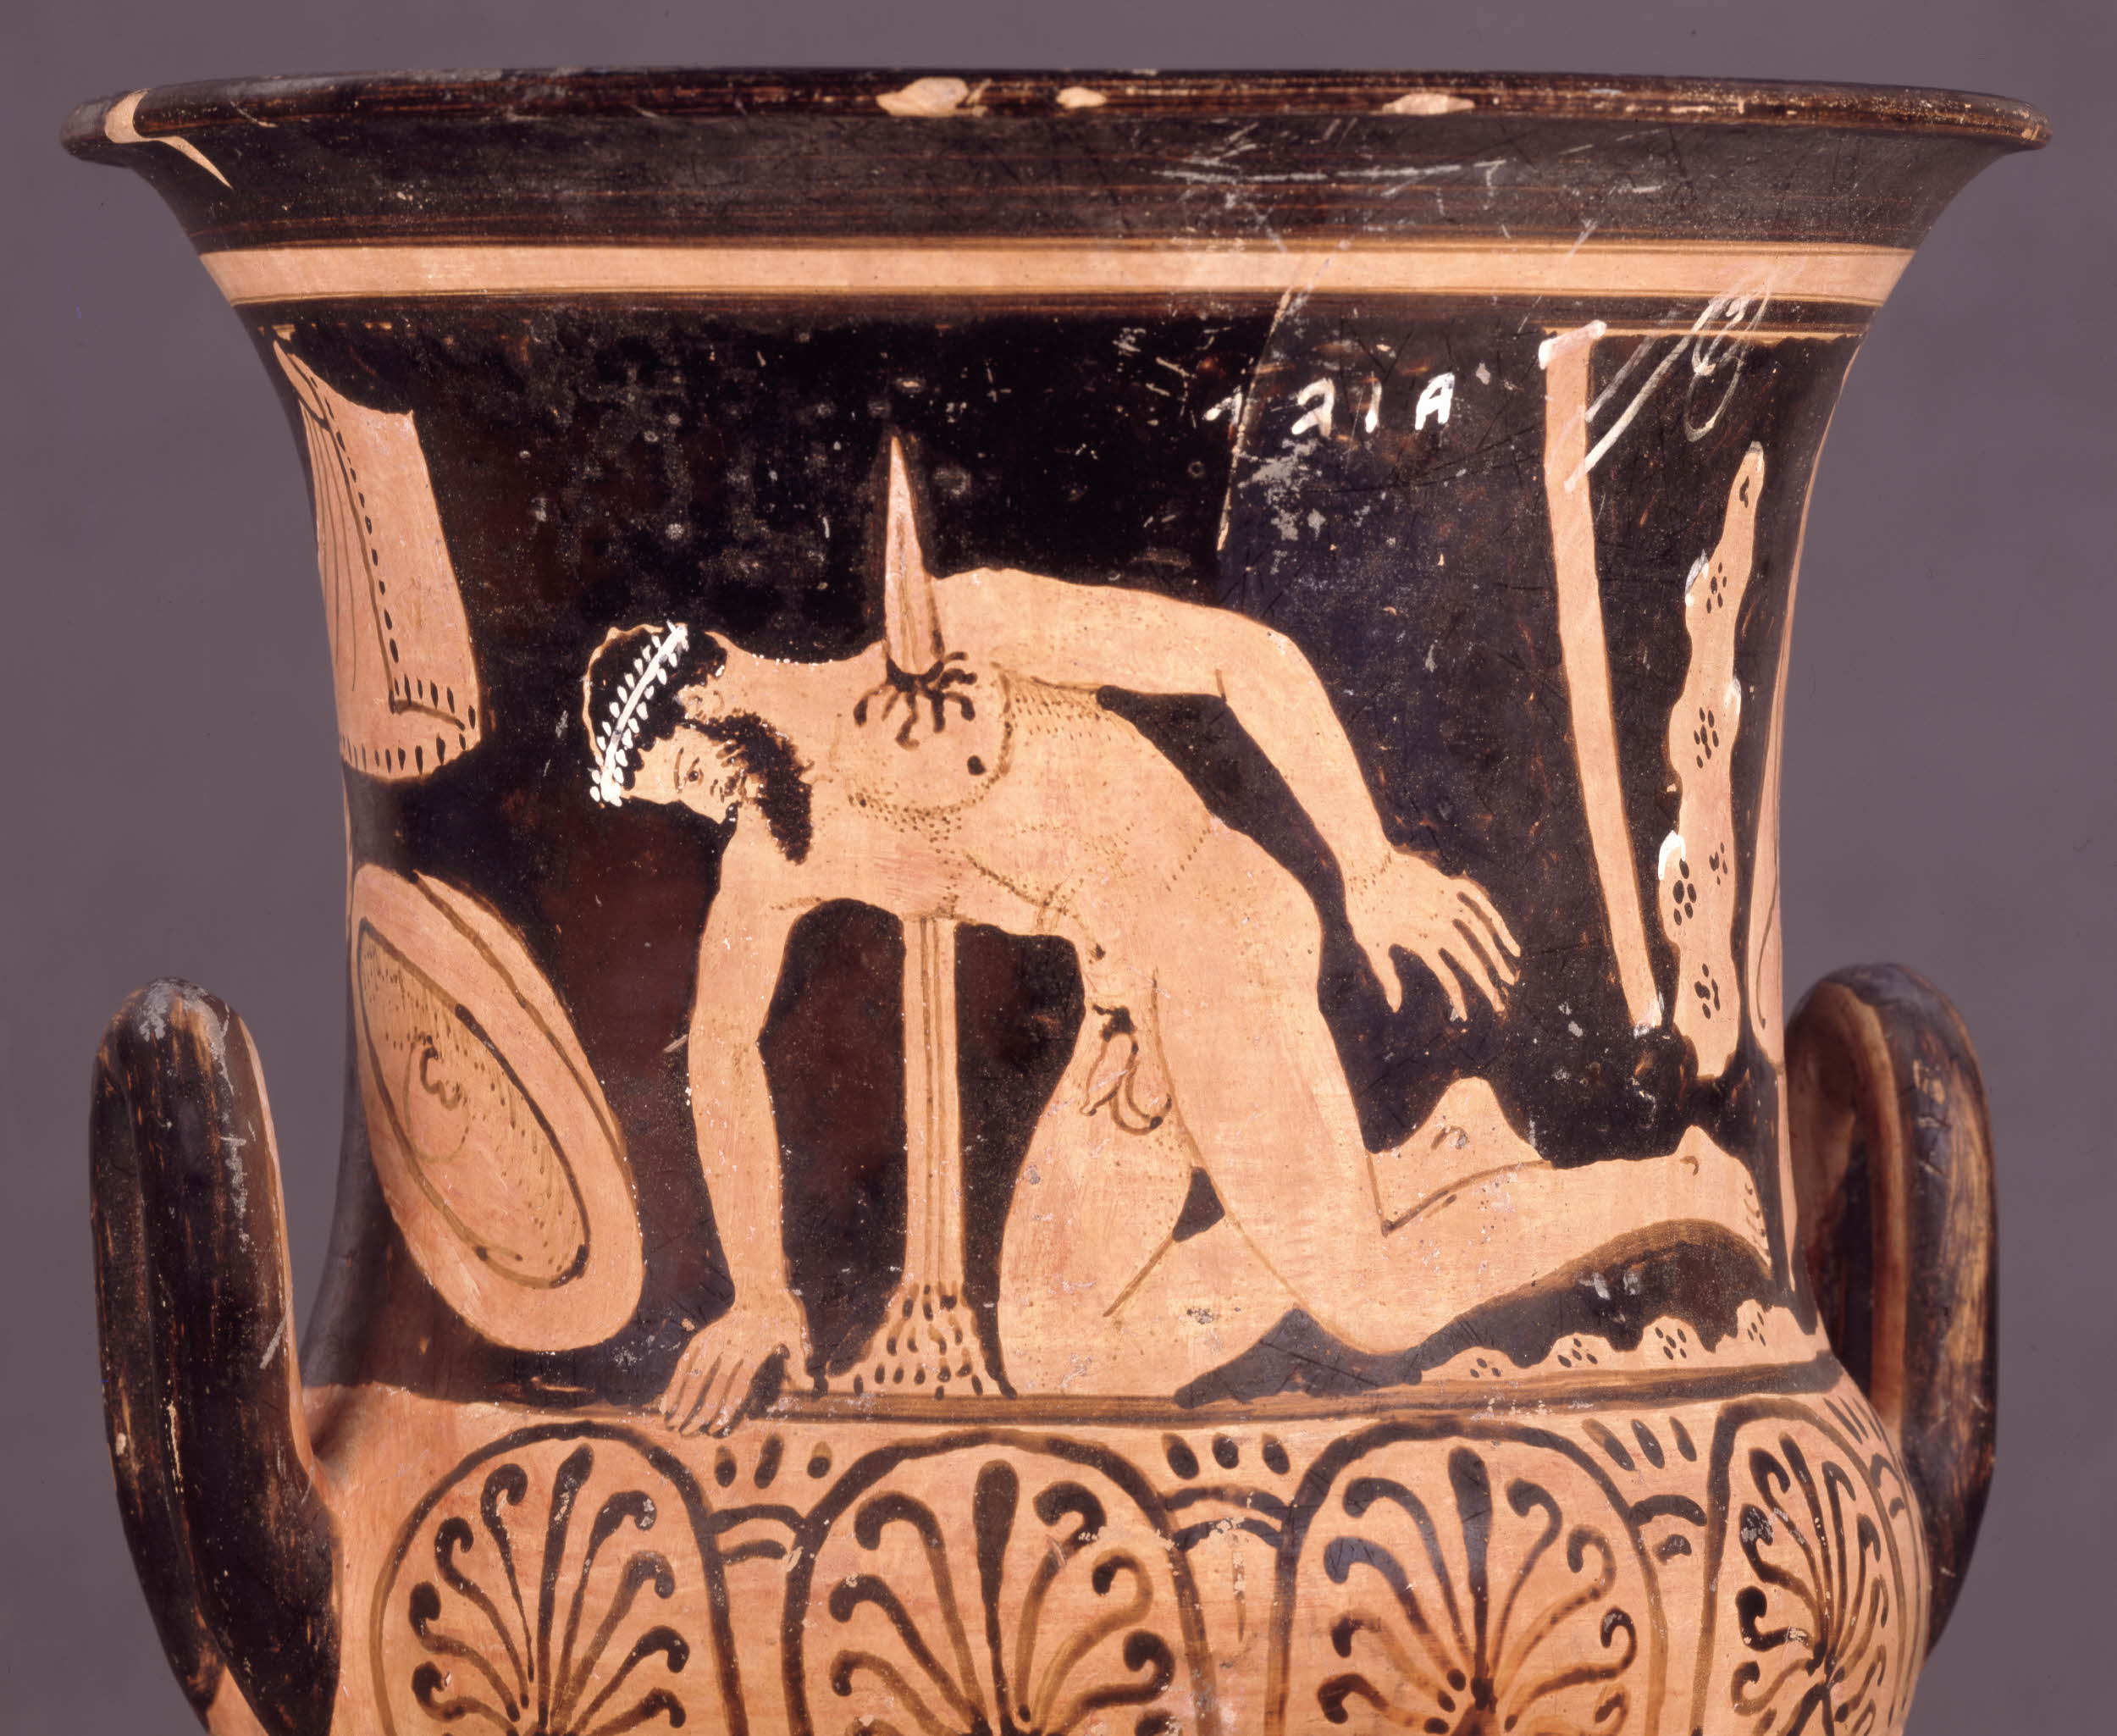 Manpower Lectures | Antiquity, aesthetes and athleticism